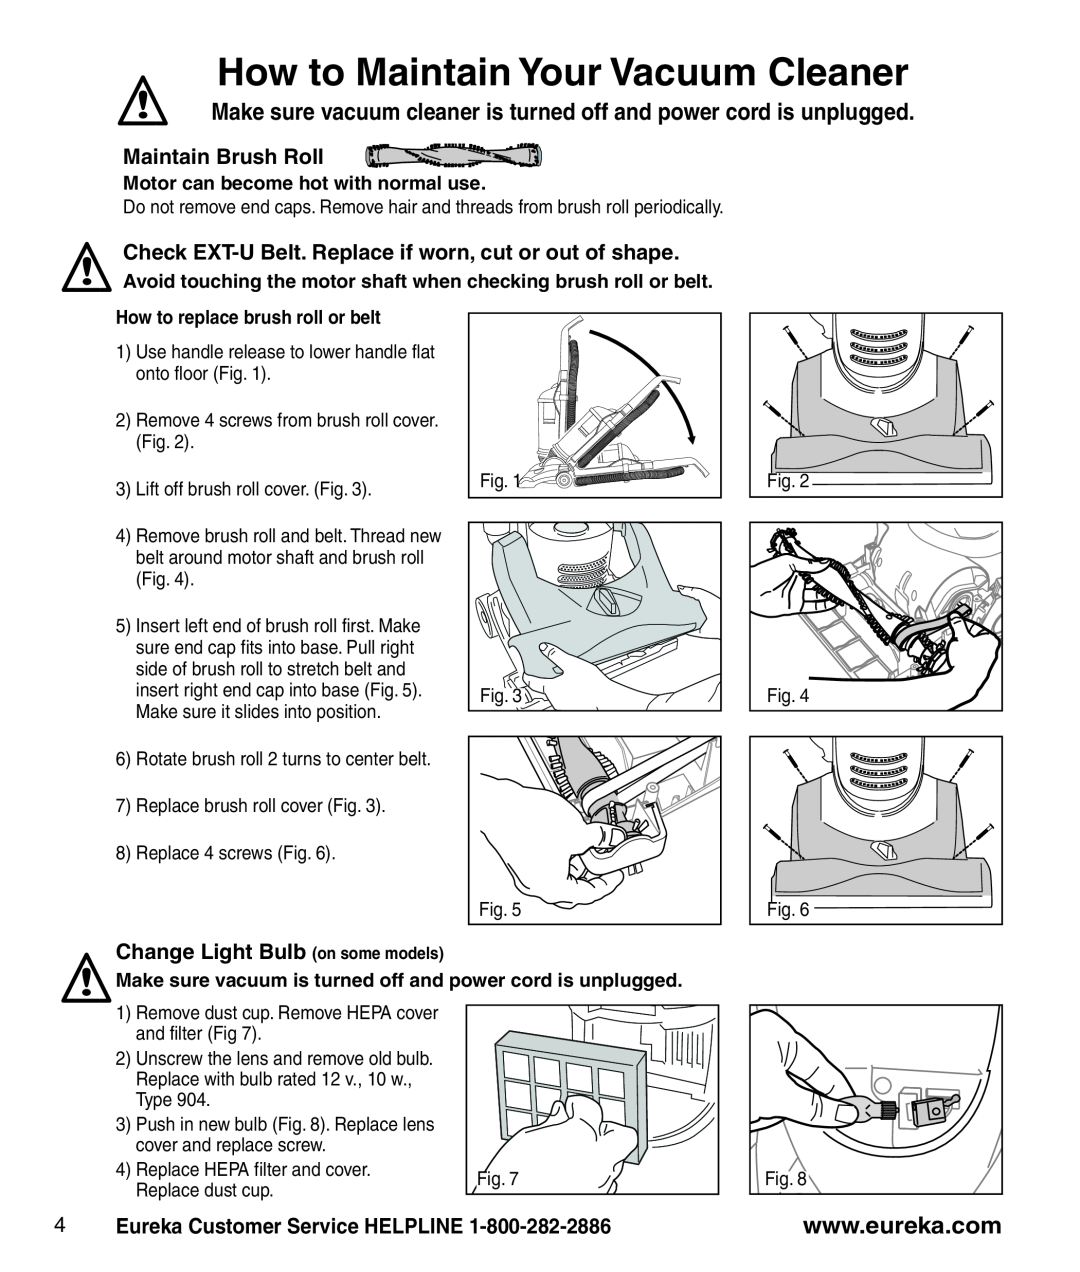 Eureka 4242A manual How to Maintain YourVacuum Cleaner, Make sure vacuum cleaner is turned off and power cord is unplugged 